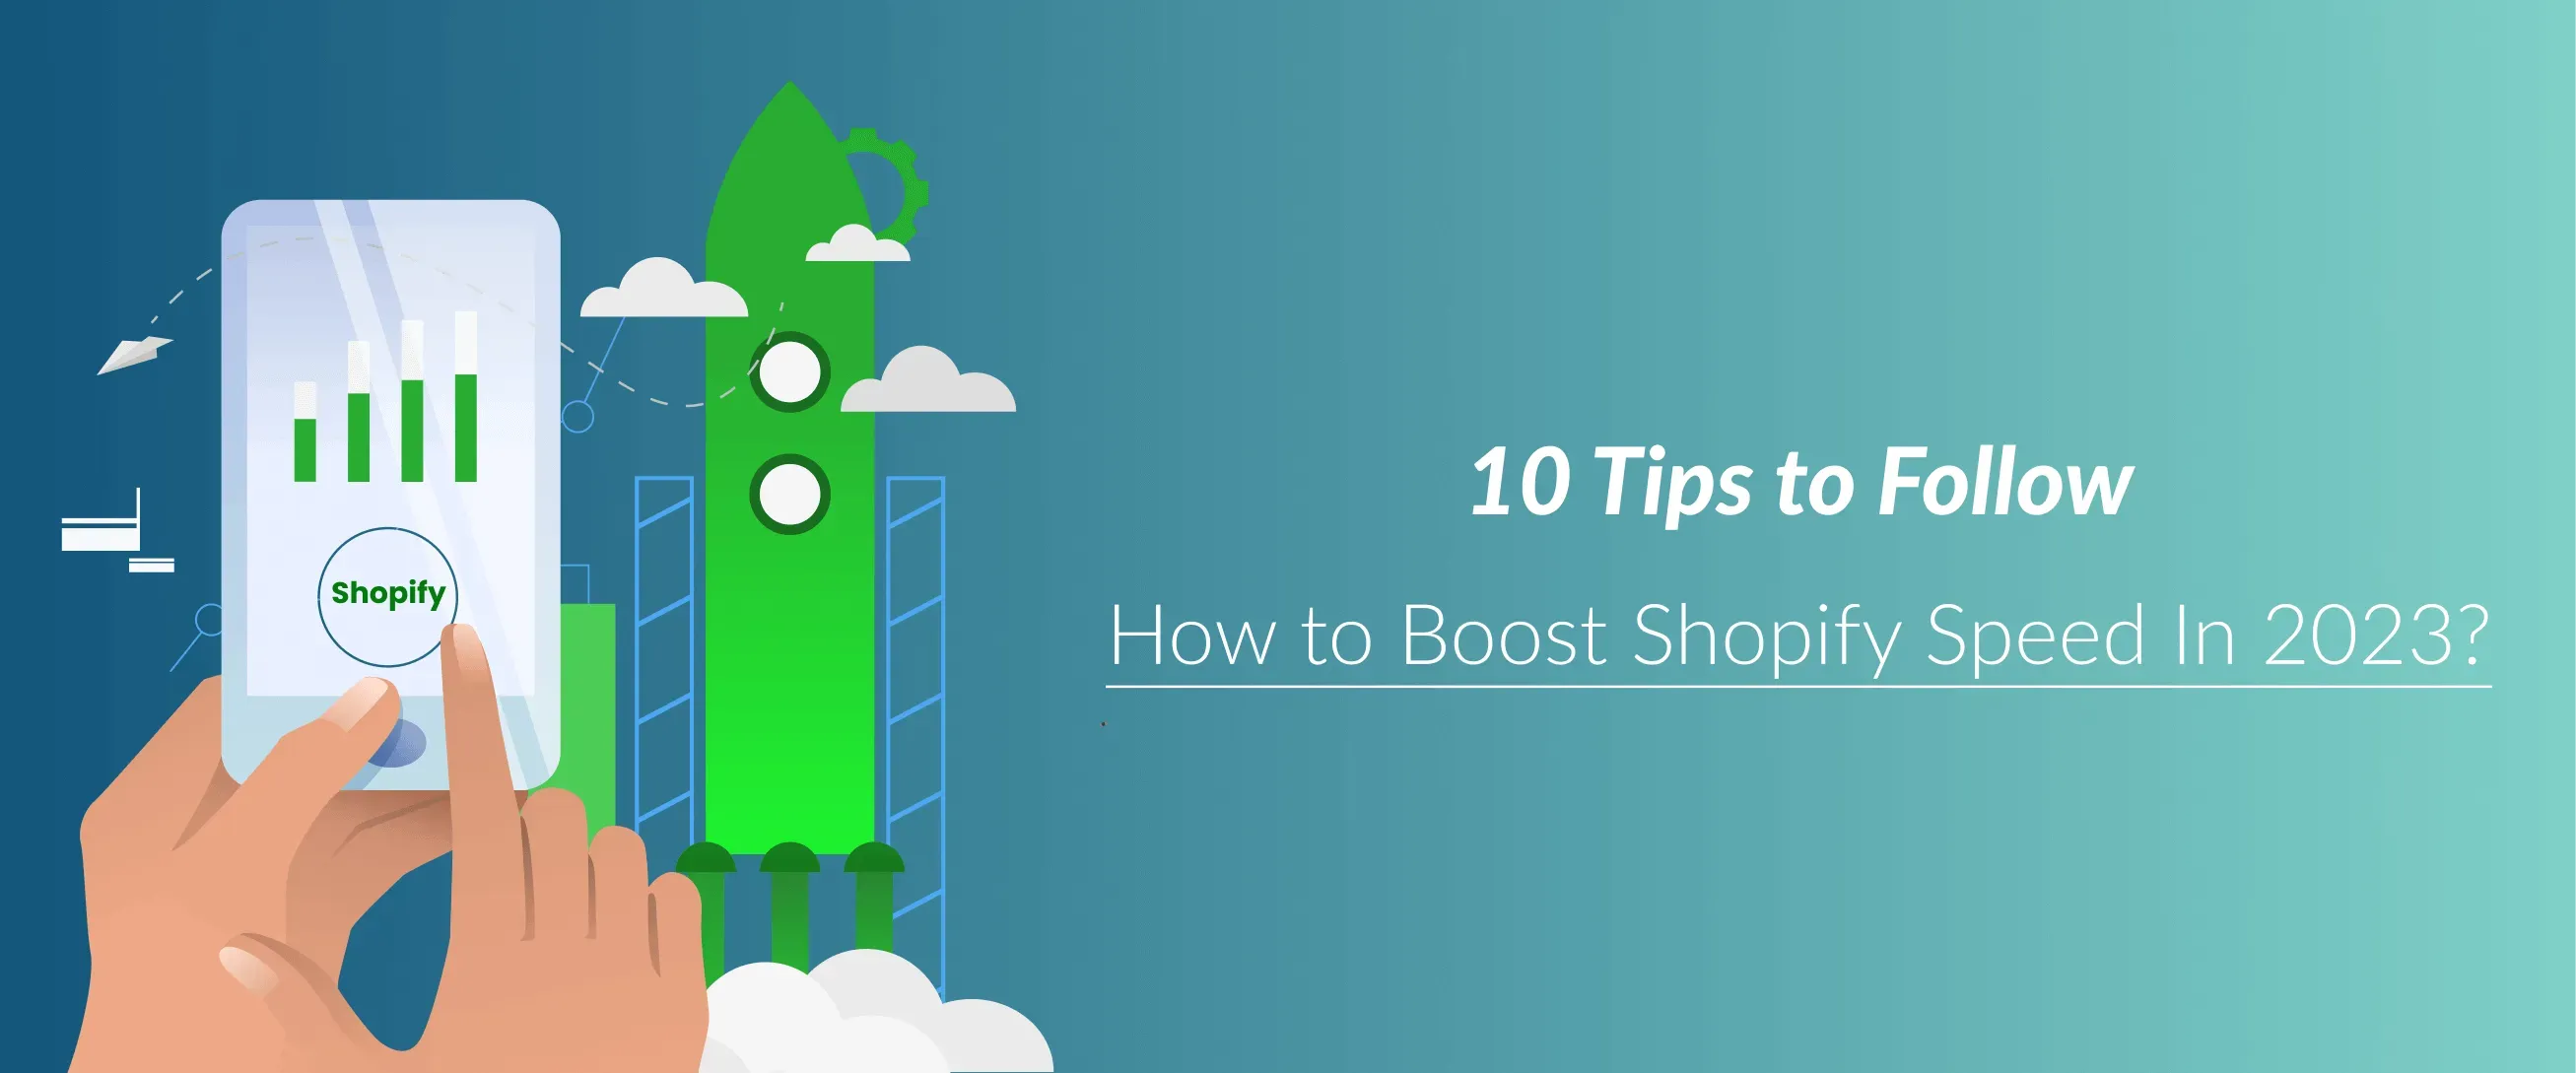  How to Boost Shopify Speed In 2023? 10 Tips to Follow